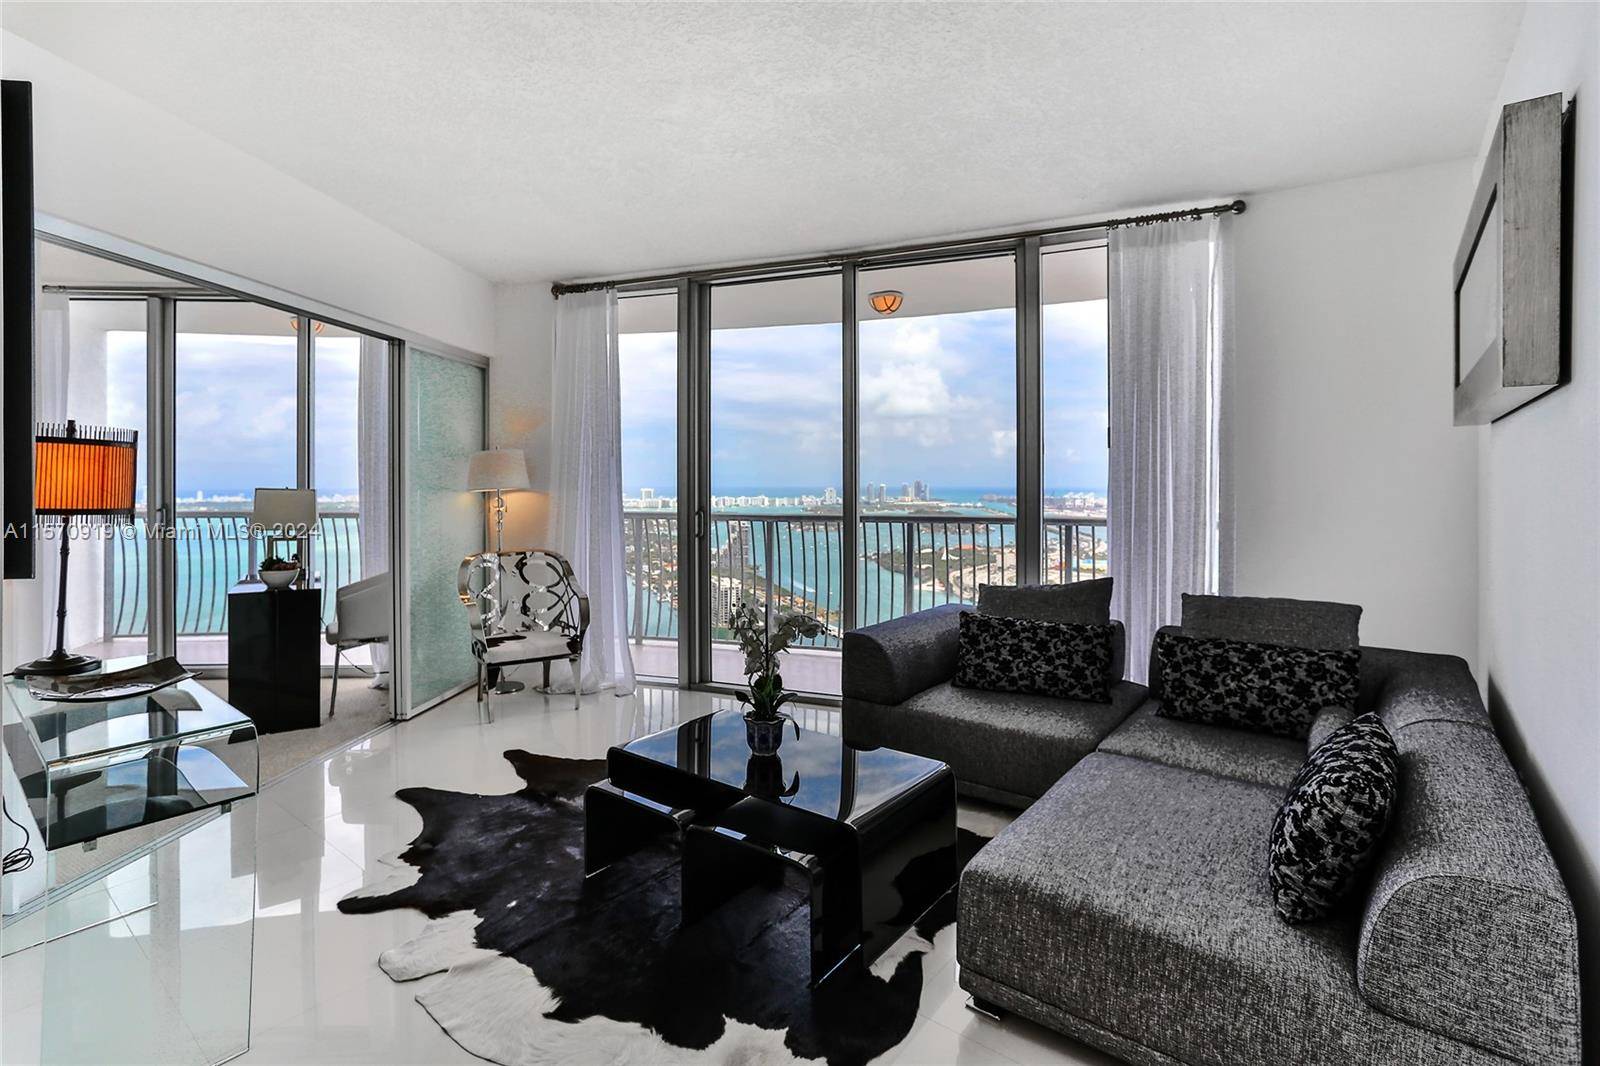 Panoramic views from this bay front 2 bedrooms and 2 bathroom in trendy Edgewater neighborhood.